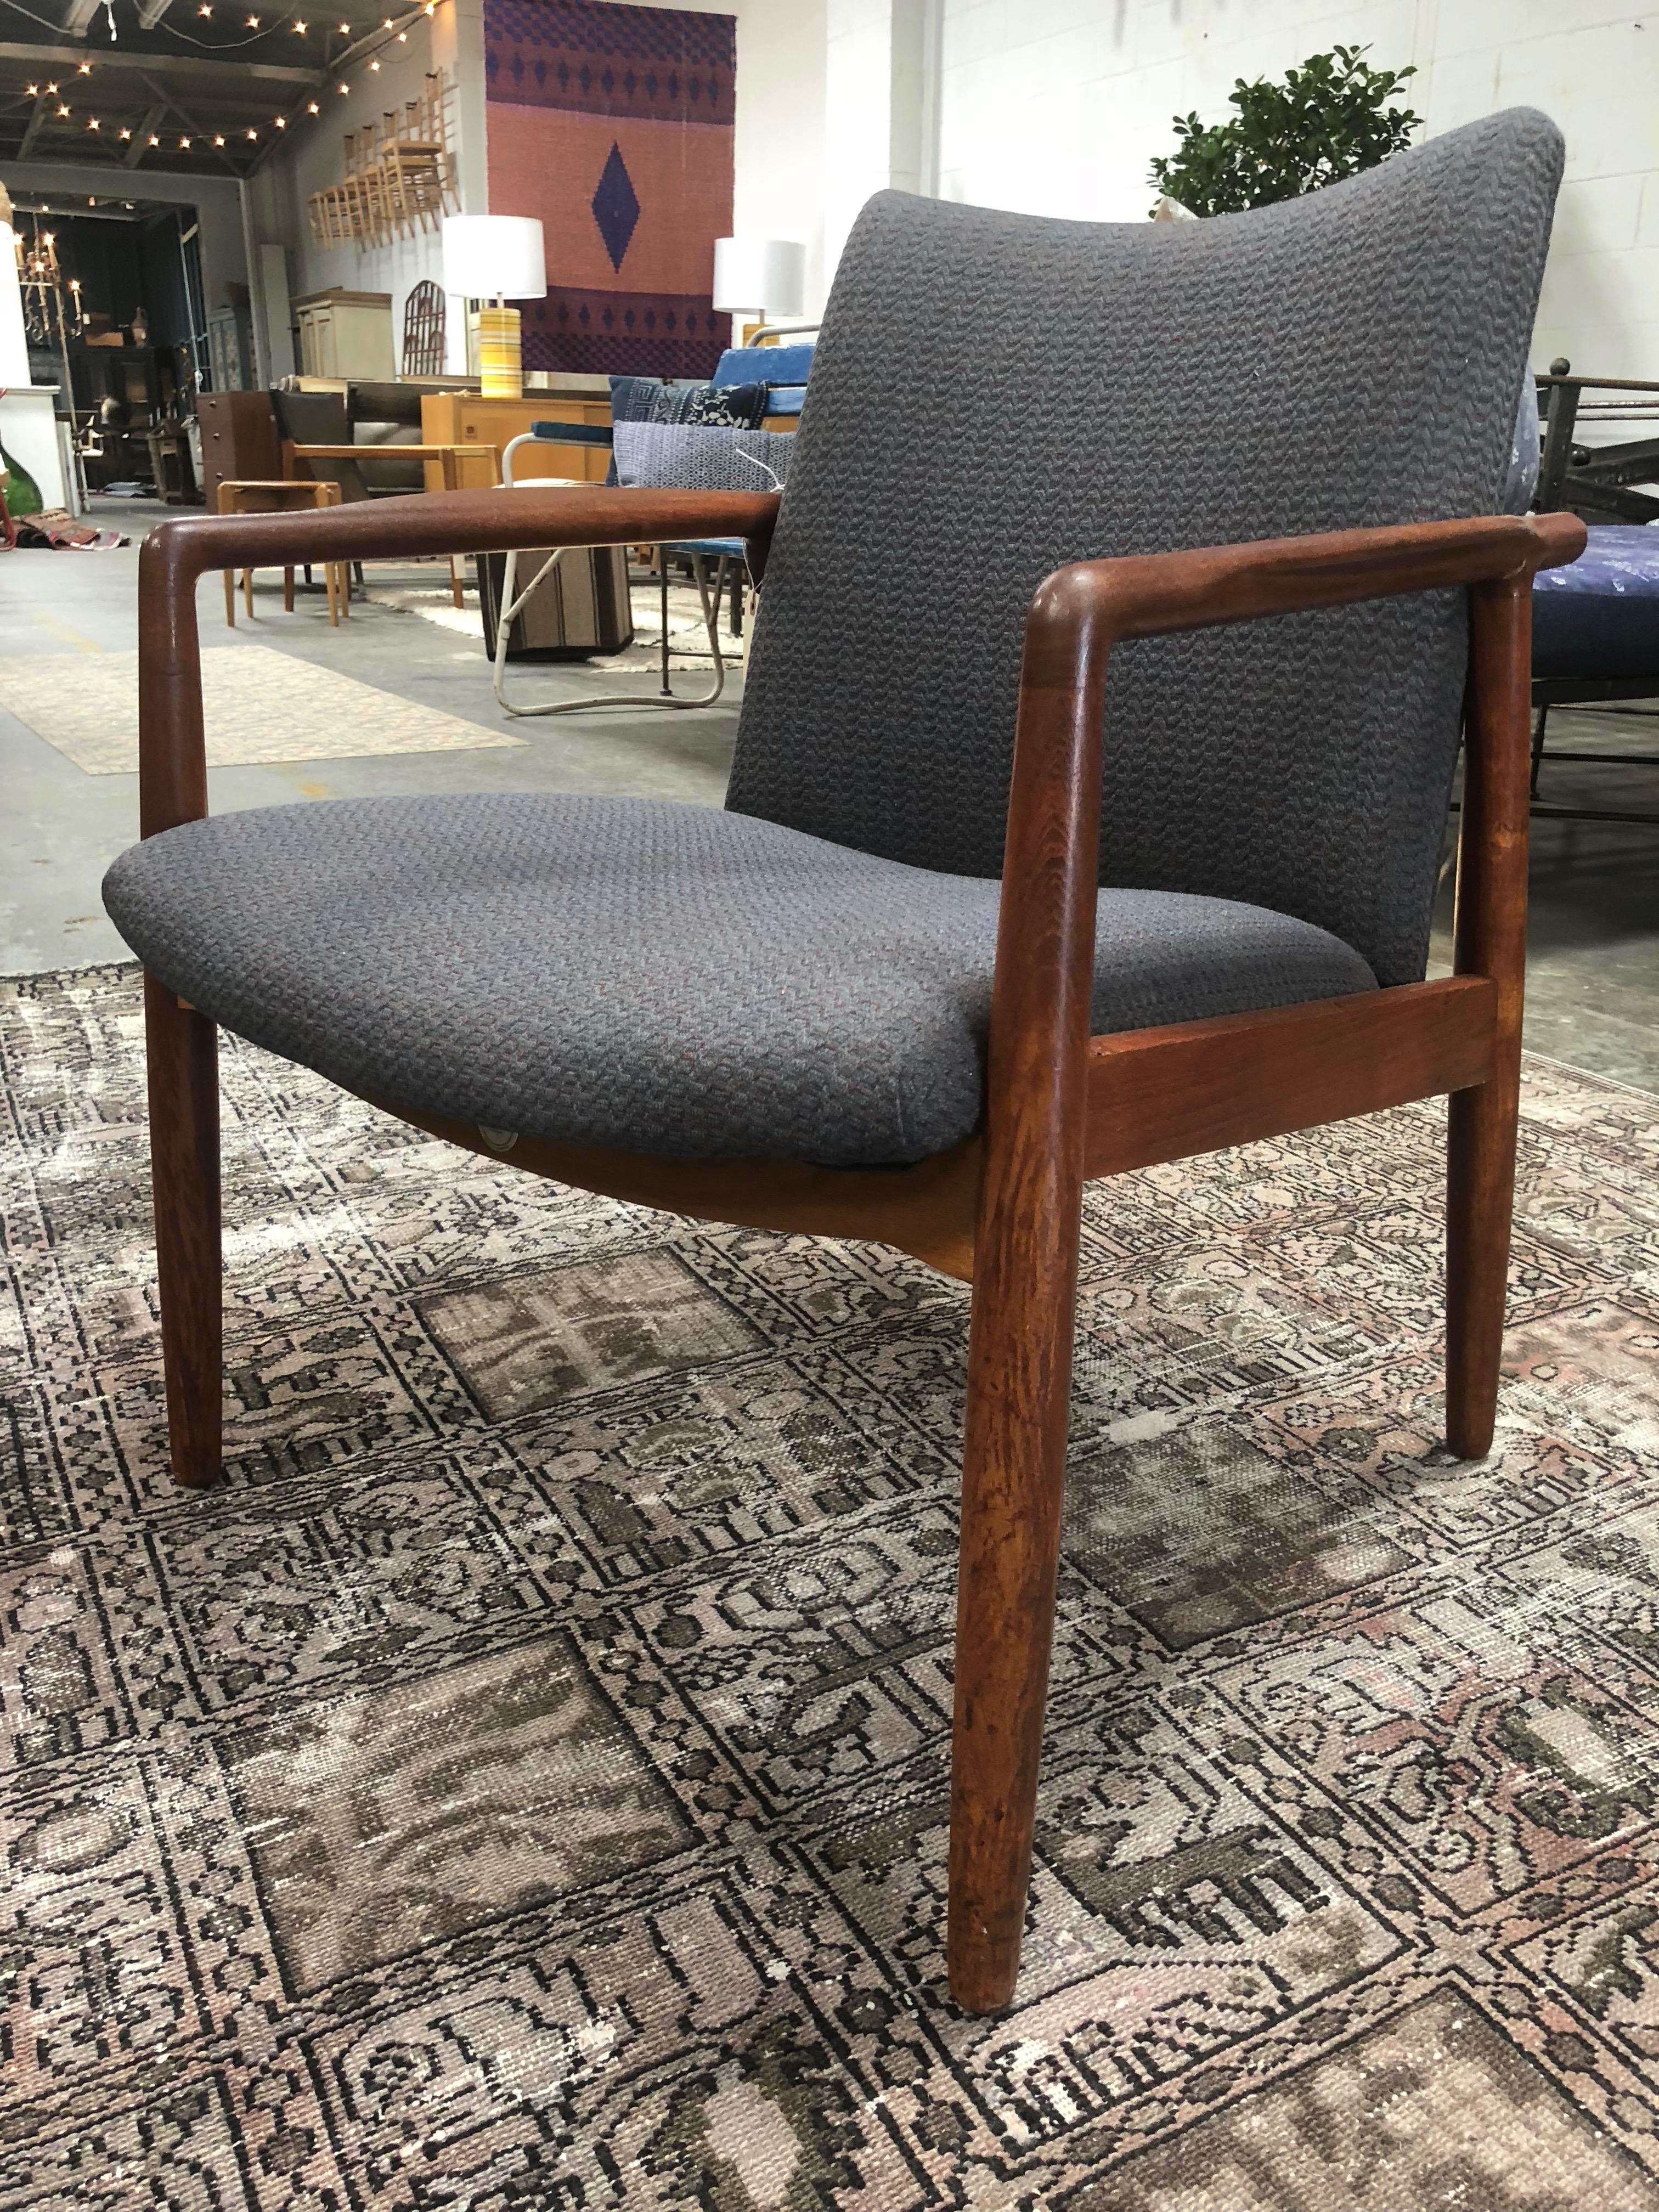 Rosewood Armchair by William Watting: Made in Denmark, Stellar condition with original upholstery.